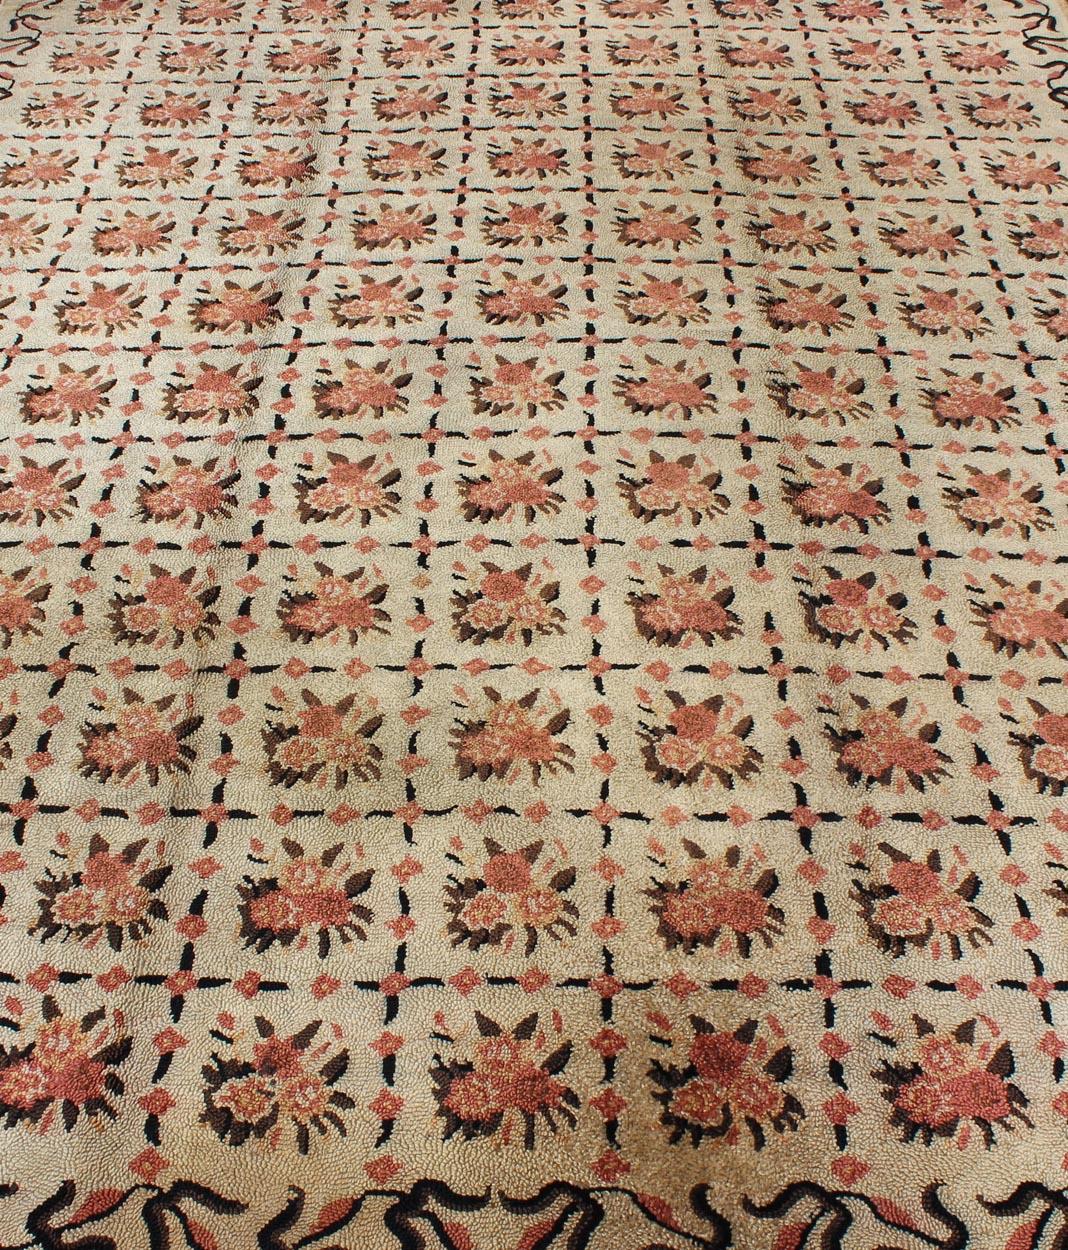 Vintage American Hooked Rug with All-Over Checkered Pattern of Floral Bouquets 3